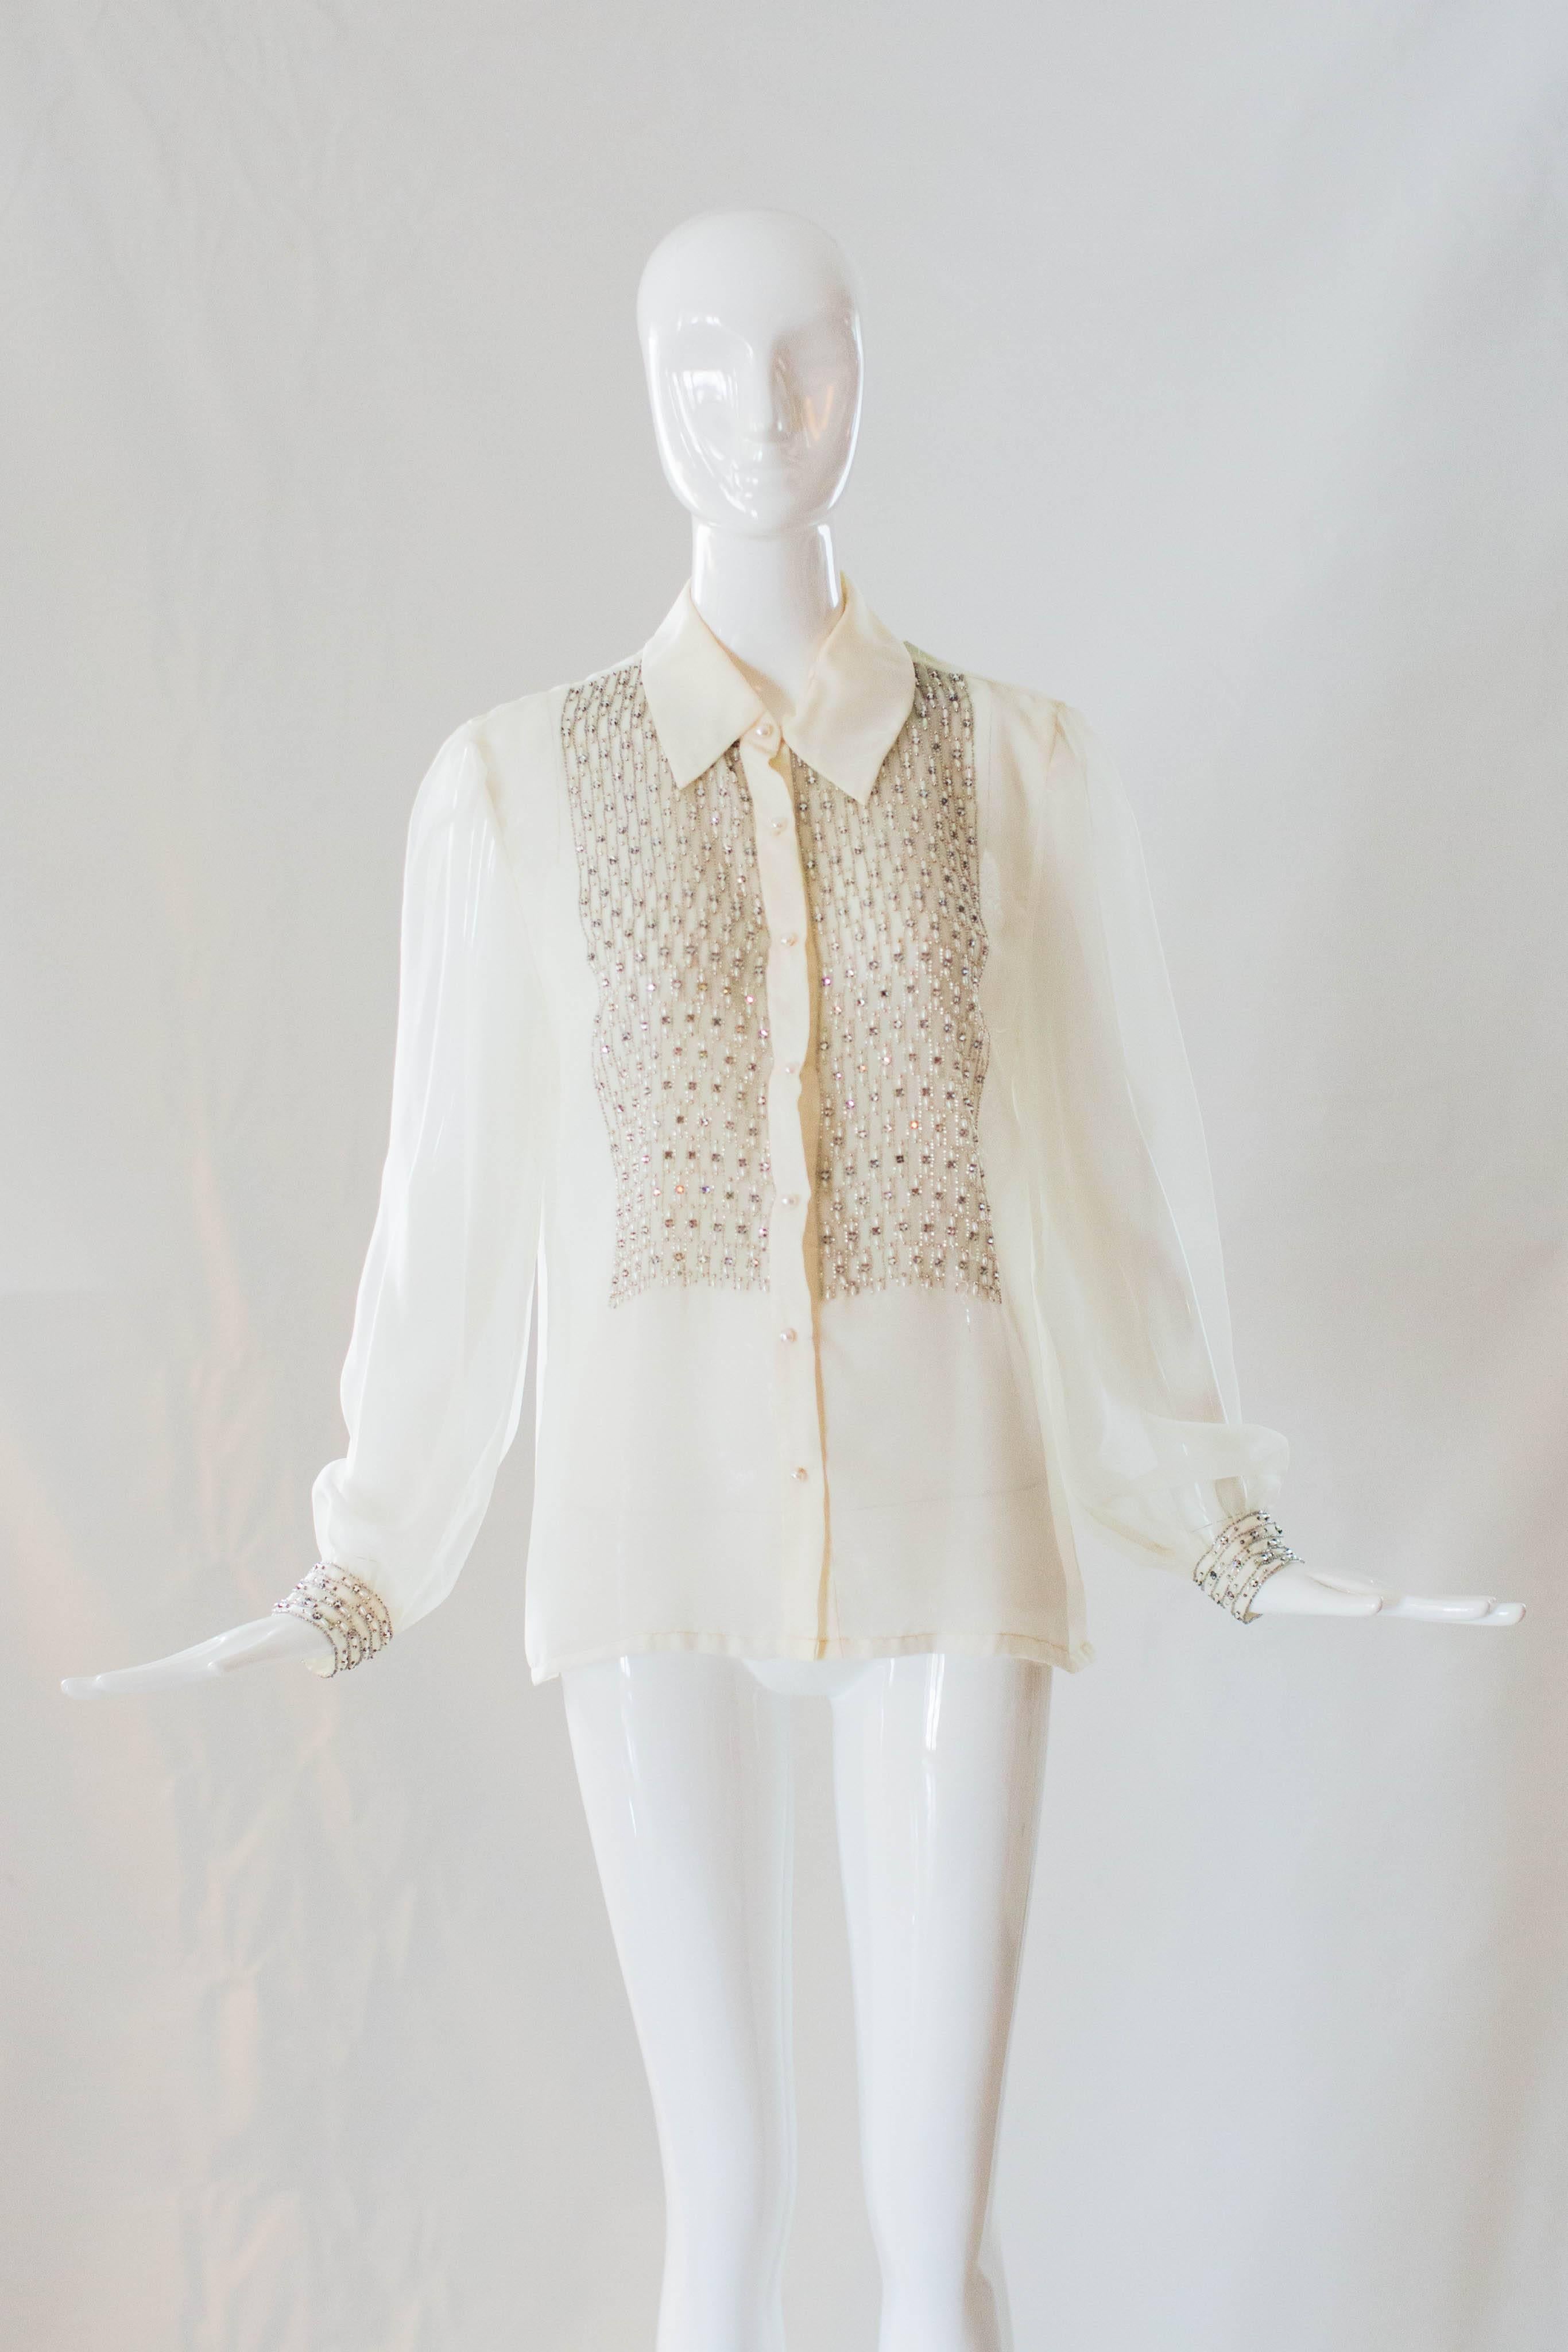 This 1960s Victoria Royal beaded blouse comes in a silhouette that will never go out of style! Gorgeous glass beaded details adorn the chest and cuffs of this cream blouse. With a large collar and faux pearl buttons down the chest, this blouse makes